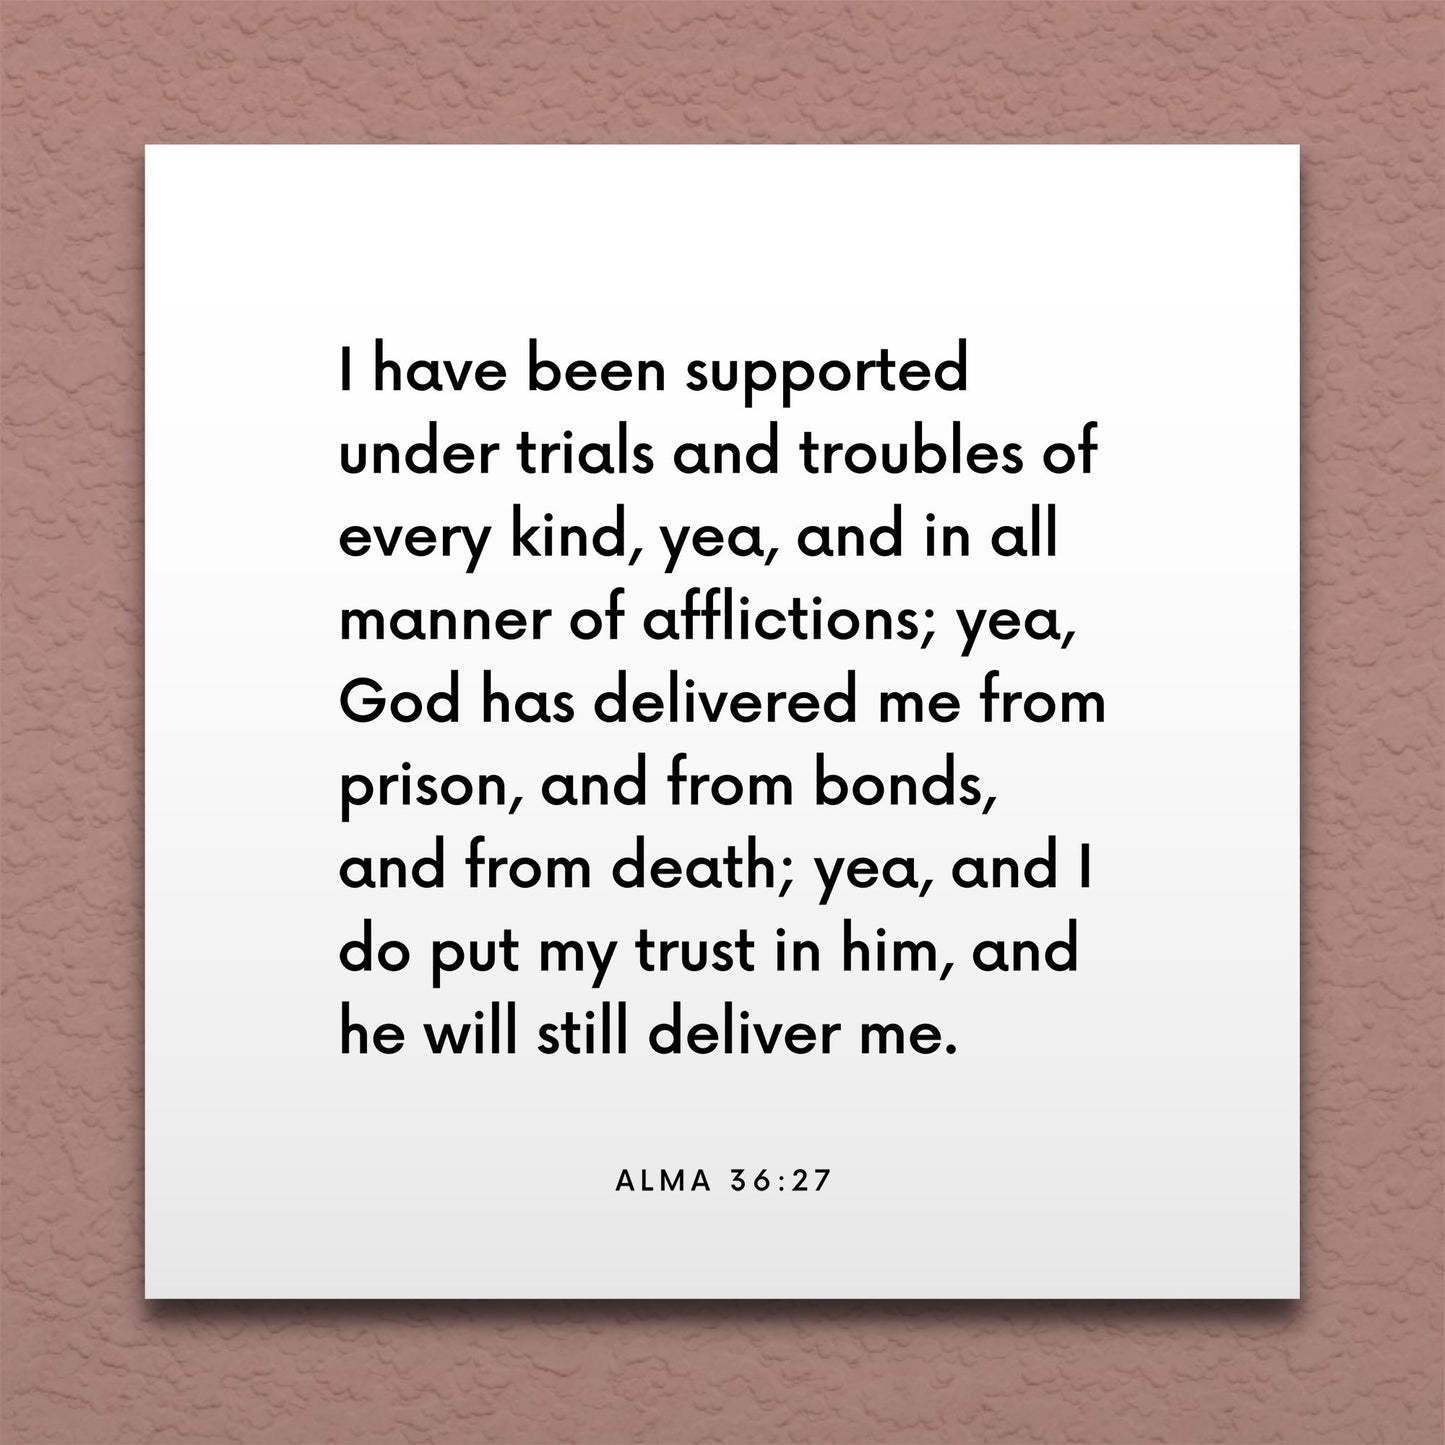 Wall-mounted scripture tile for Alma 36:27 - "I do put my trust in him, and he will still deliver me"